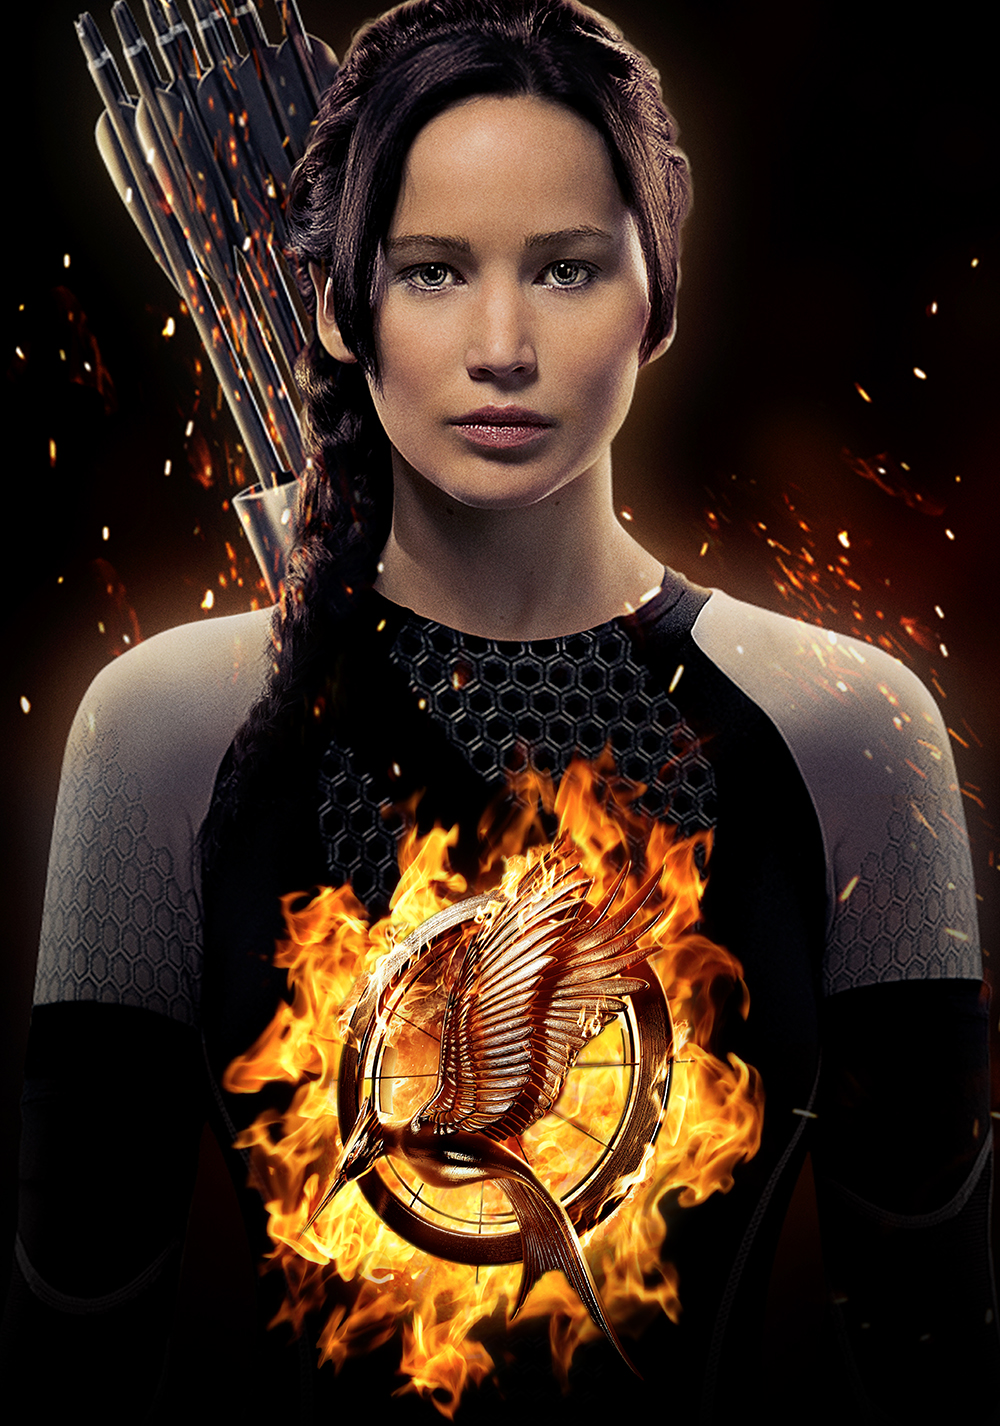 The Hunger Games: Catching Fire free